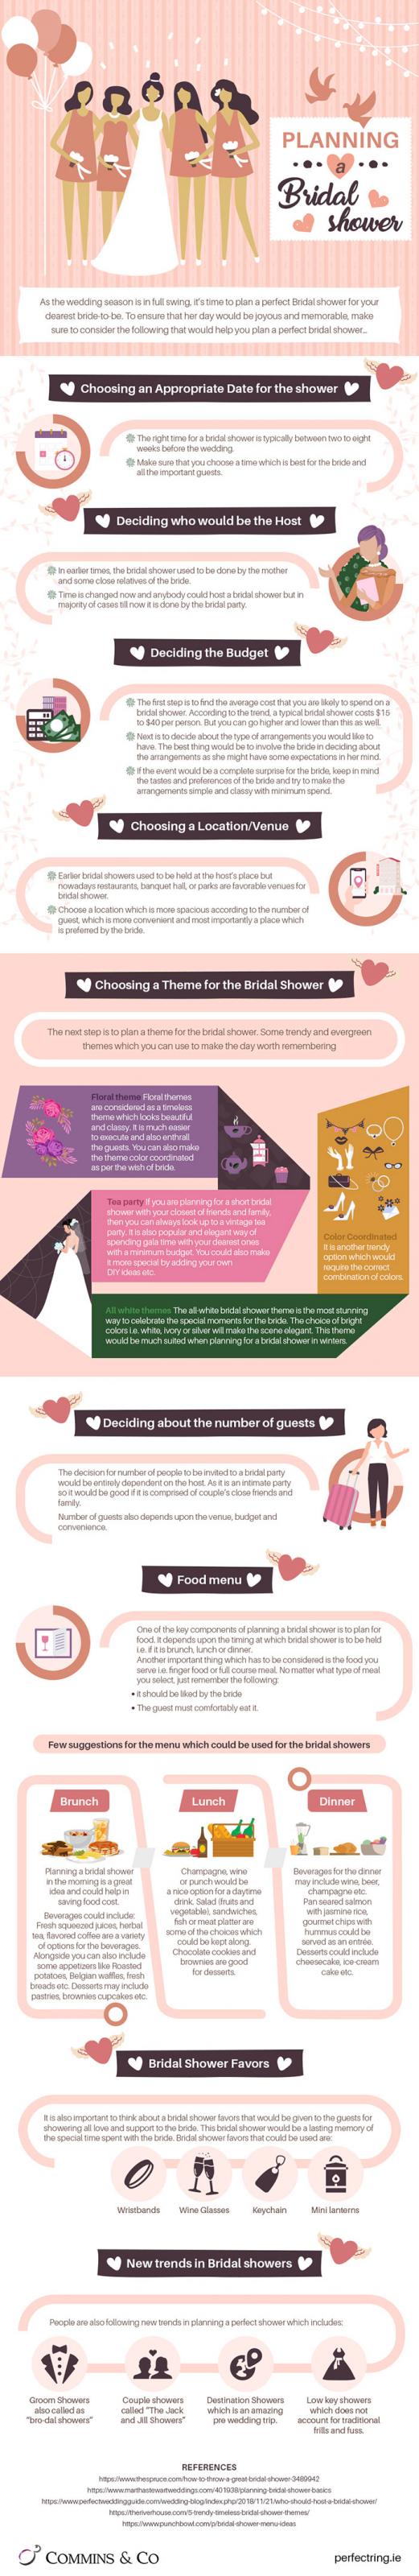 Planning a Bridal Shower (Infographic)